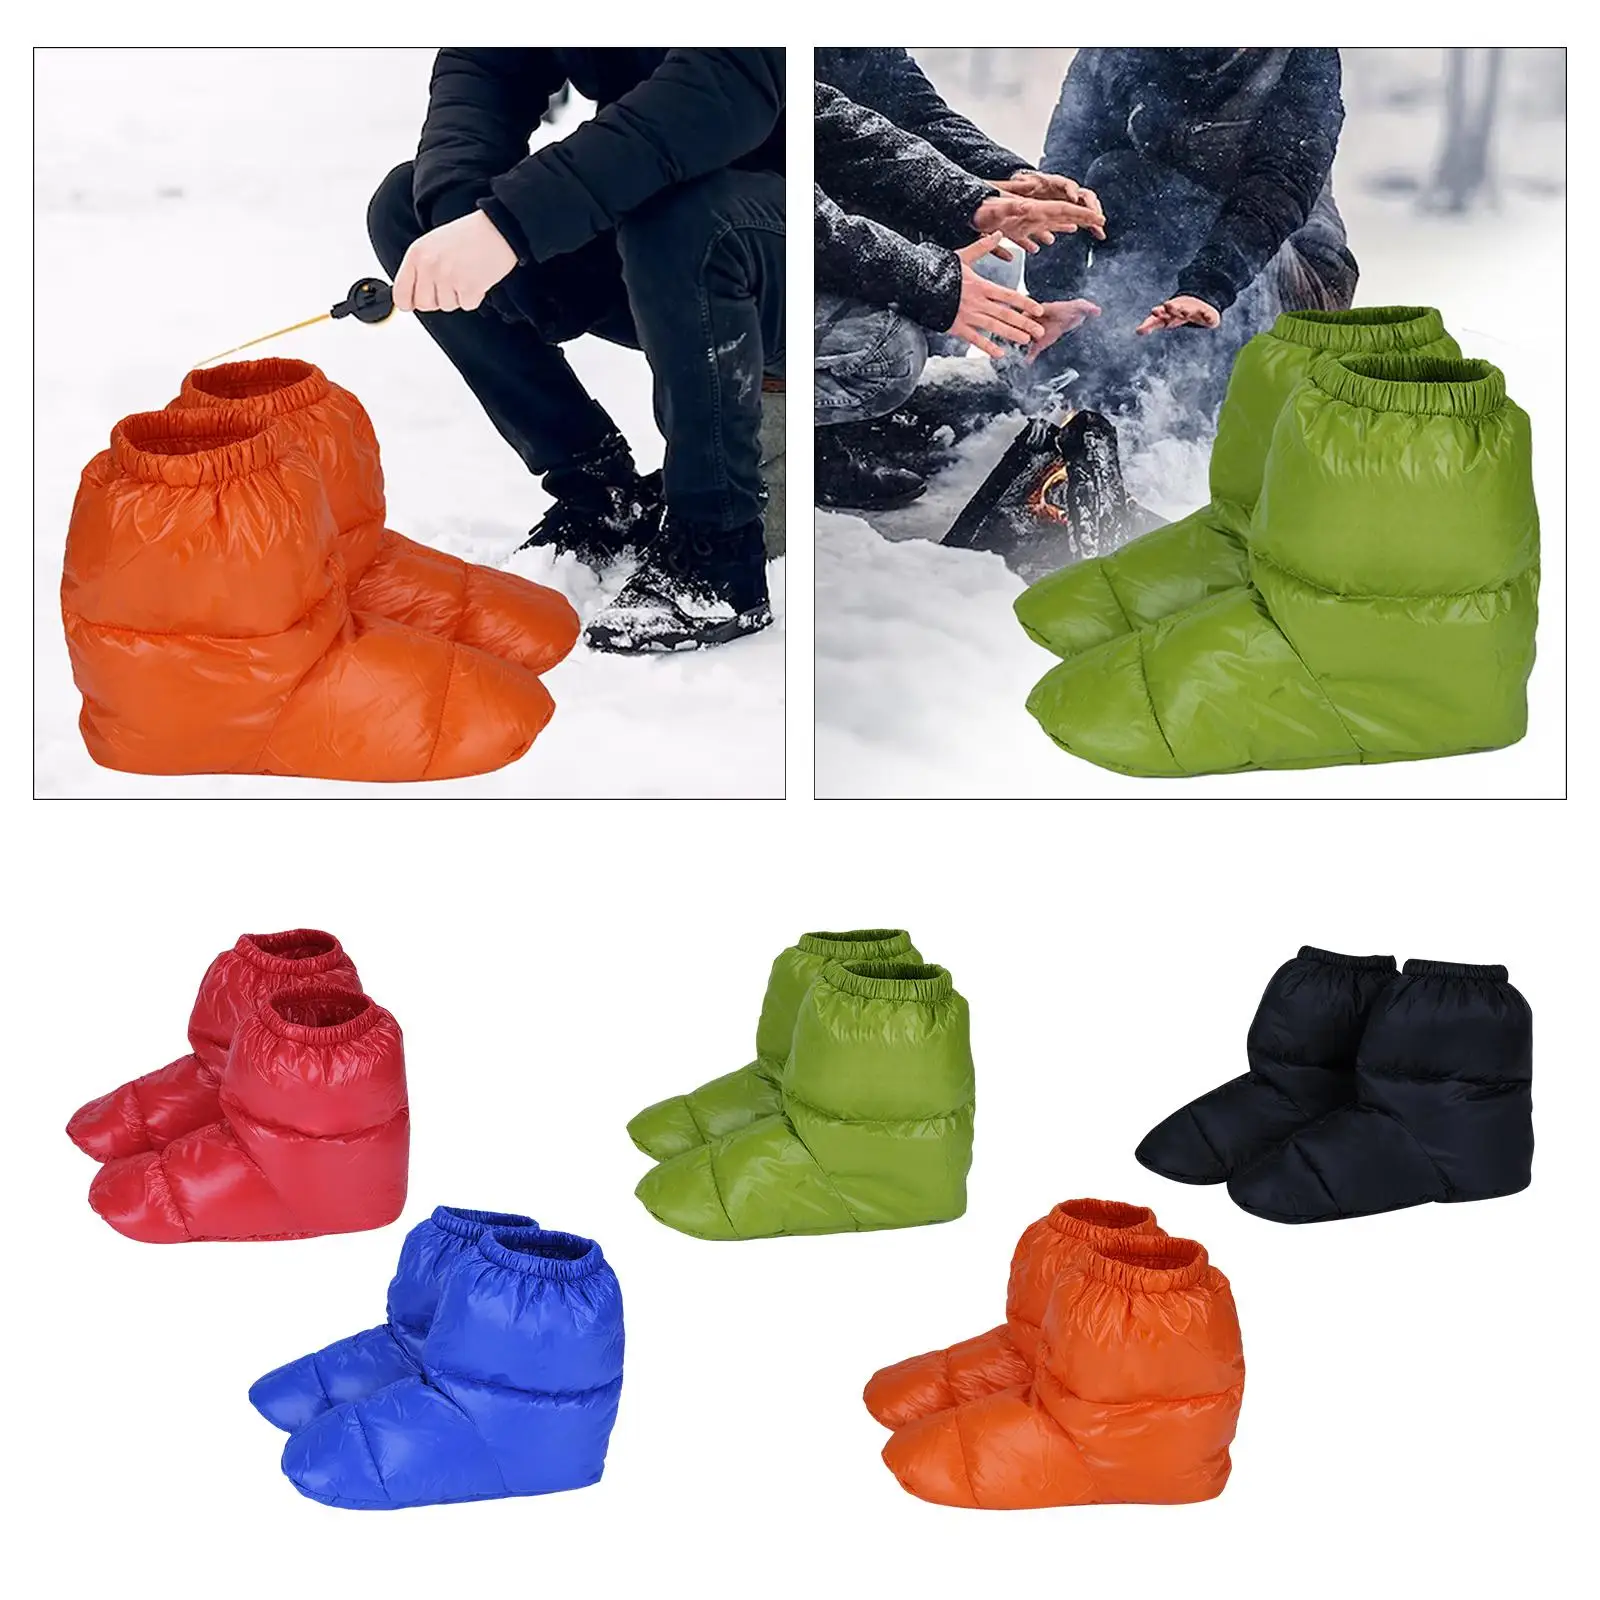 1 Pair Winter Down Slippers Warm Bootie Shoes Lightweight Soft Waterproof Footwear for Fishing Camping Skiing Bedroom Outdoor